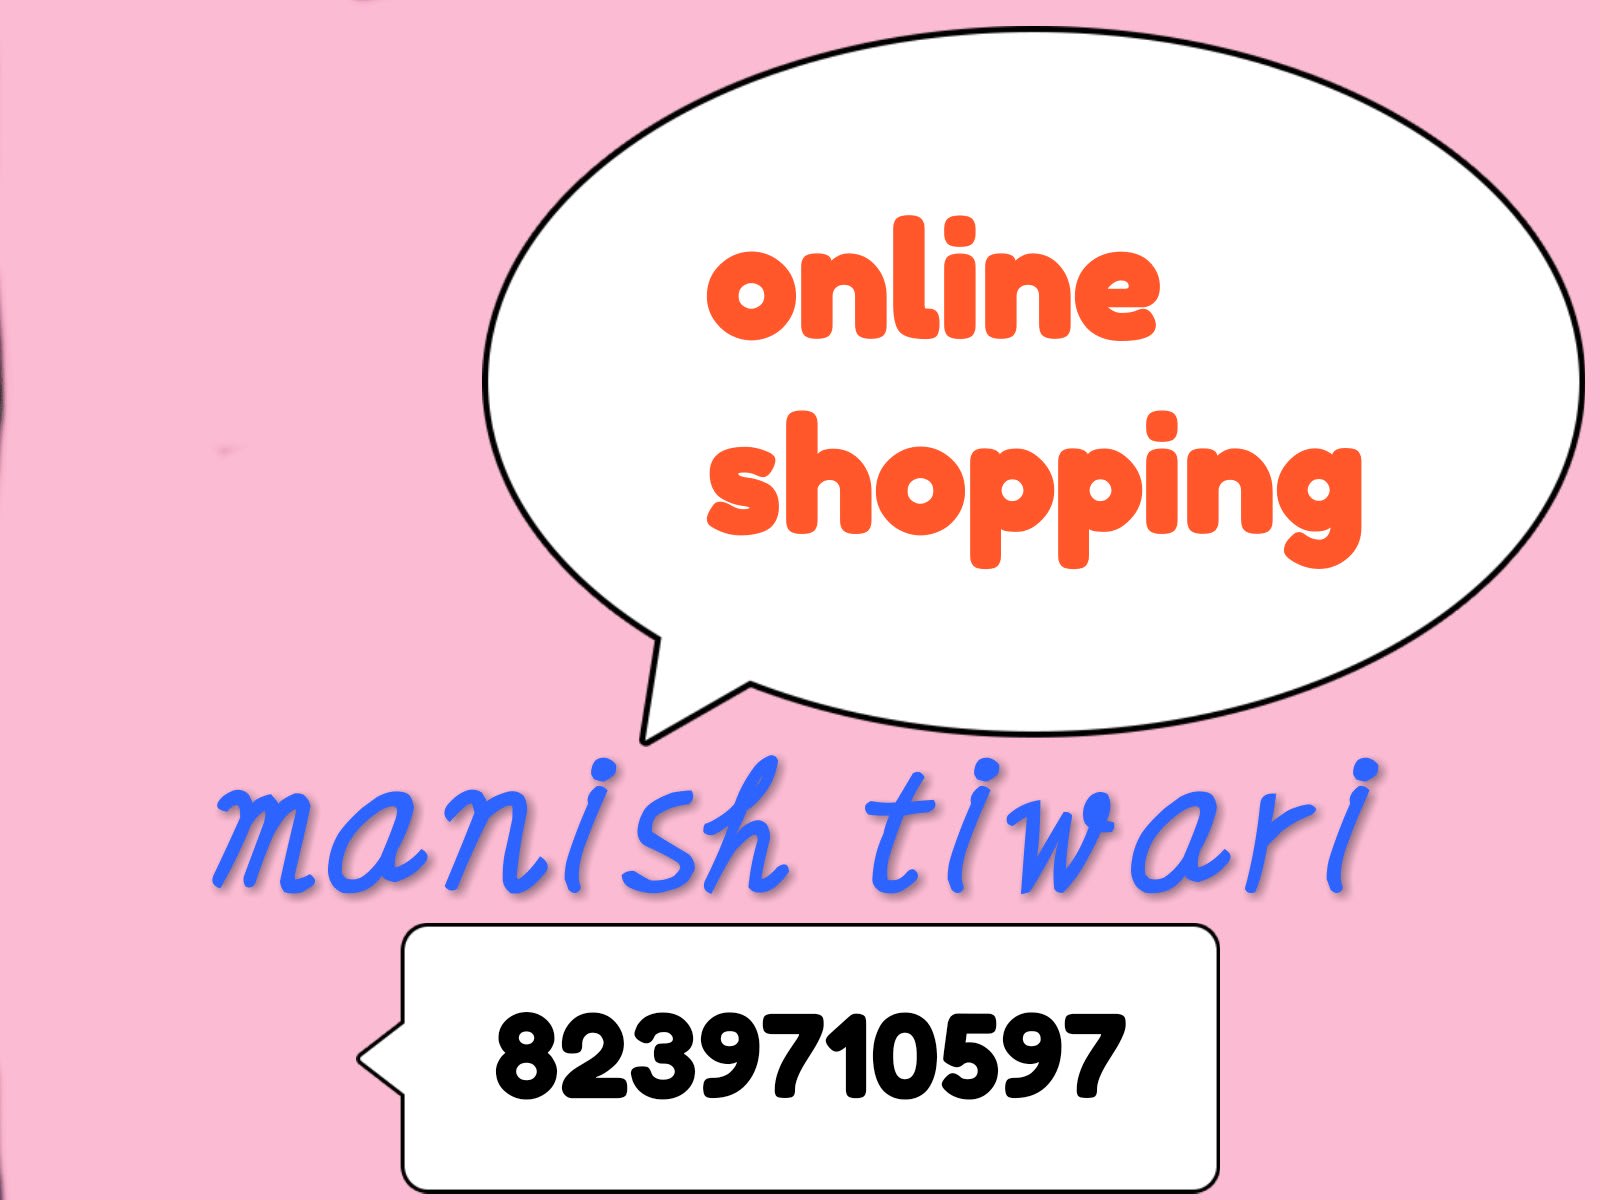 Shipping with manish